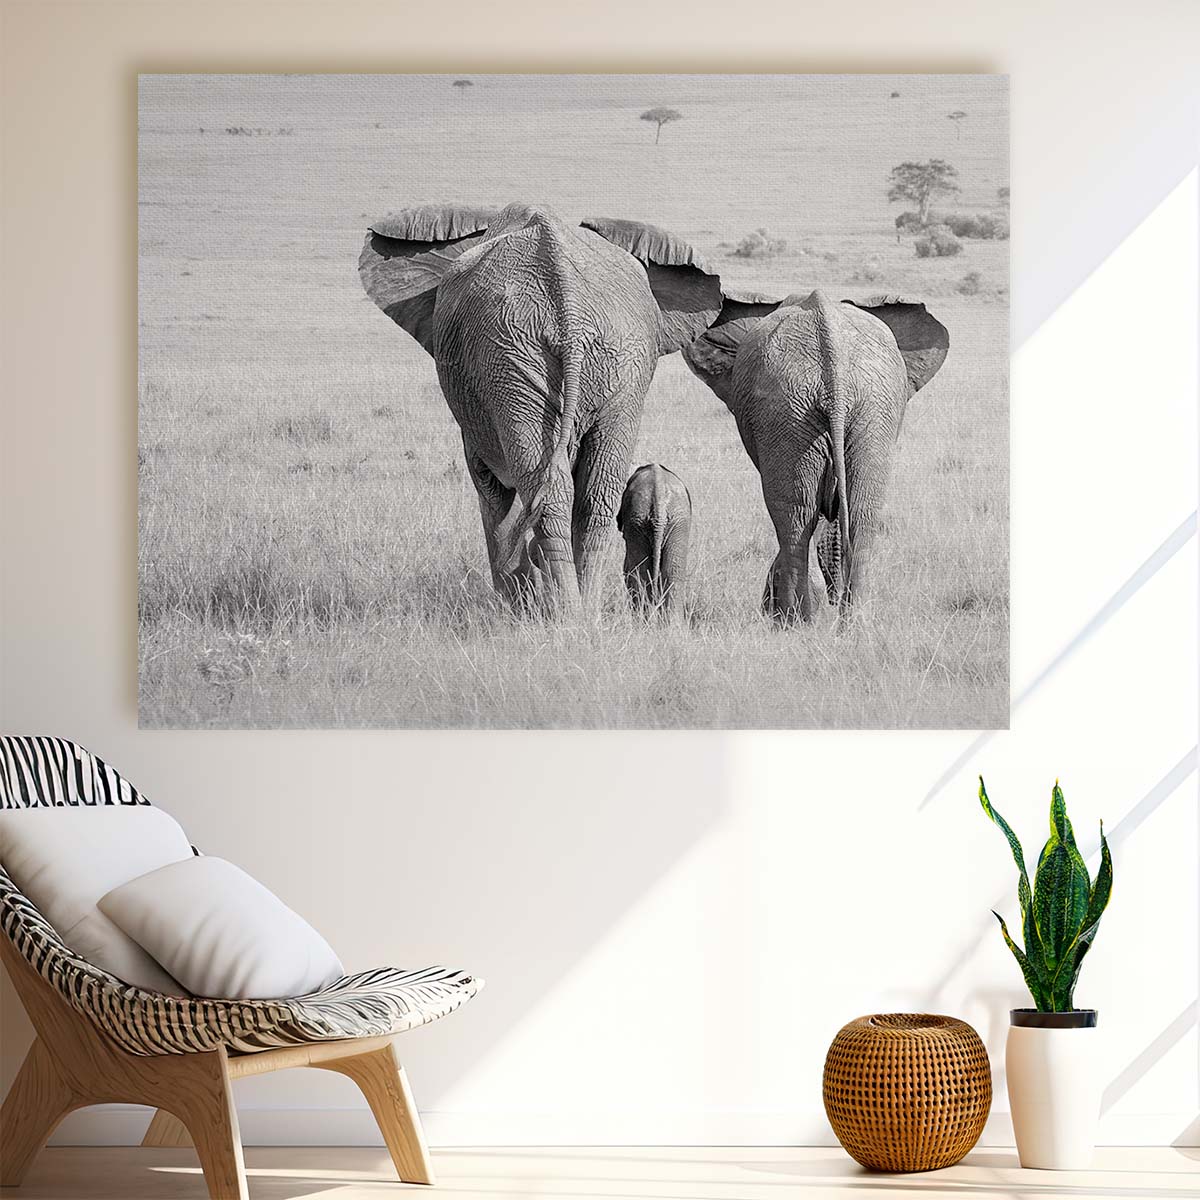 Elephant Family Love Safari Monochrome Wall Art by Luxuriance Designs. Made in USA.